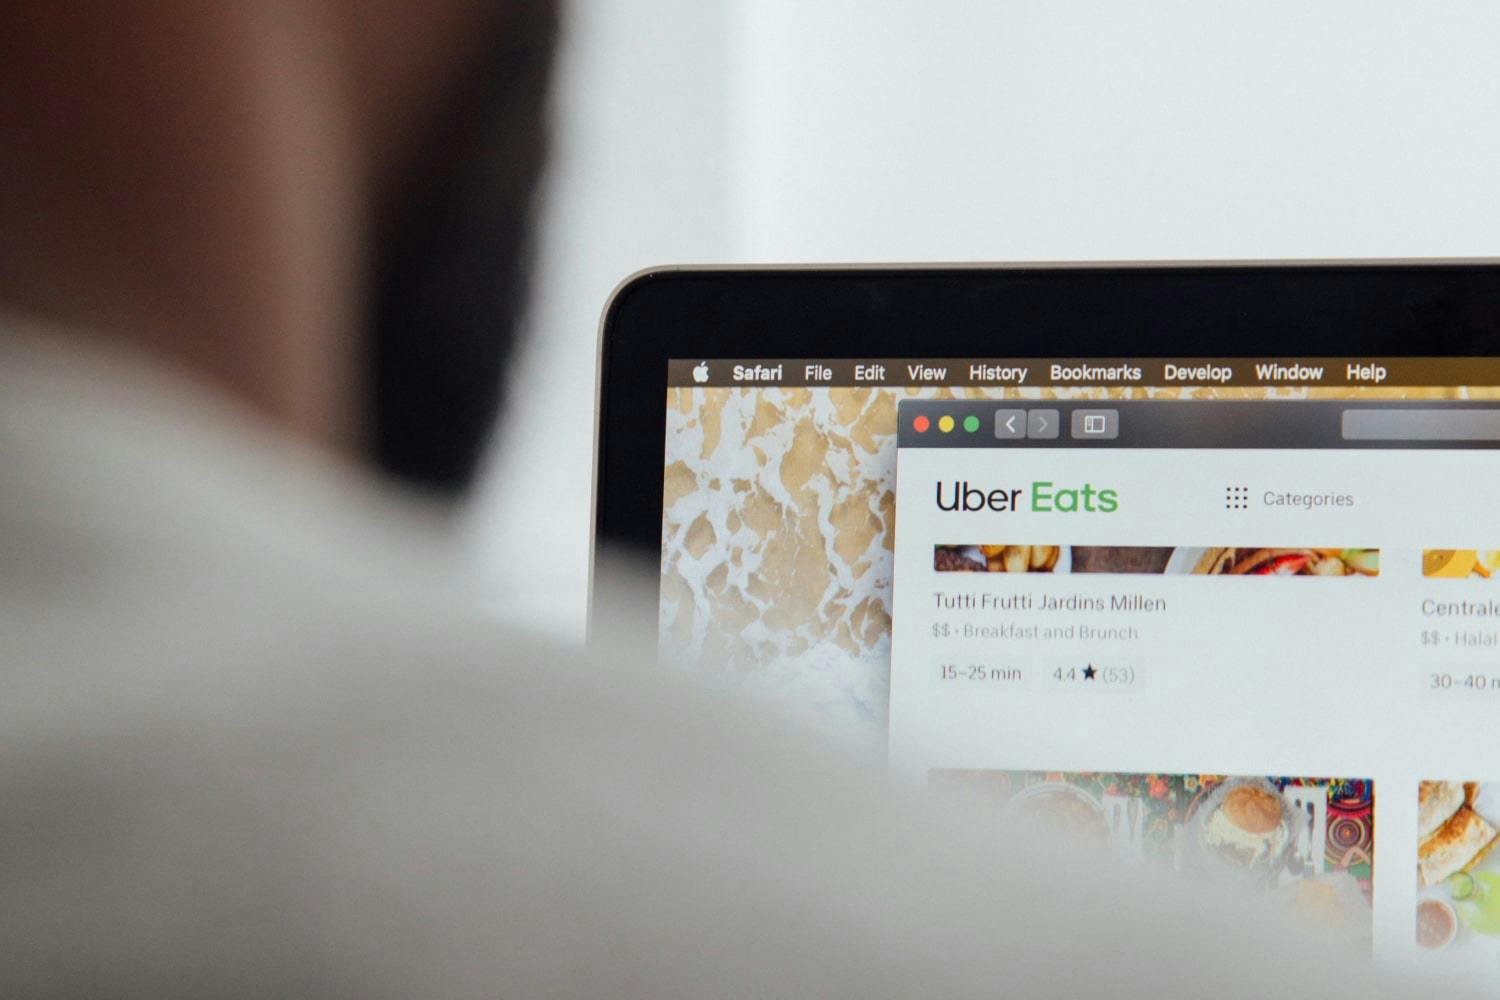 Image of a person looking at a laptop screen with the Uber Eats website open